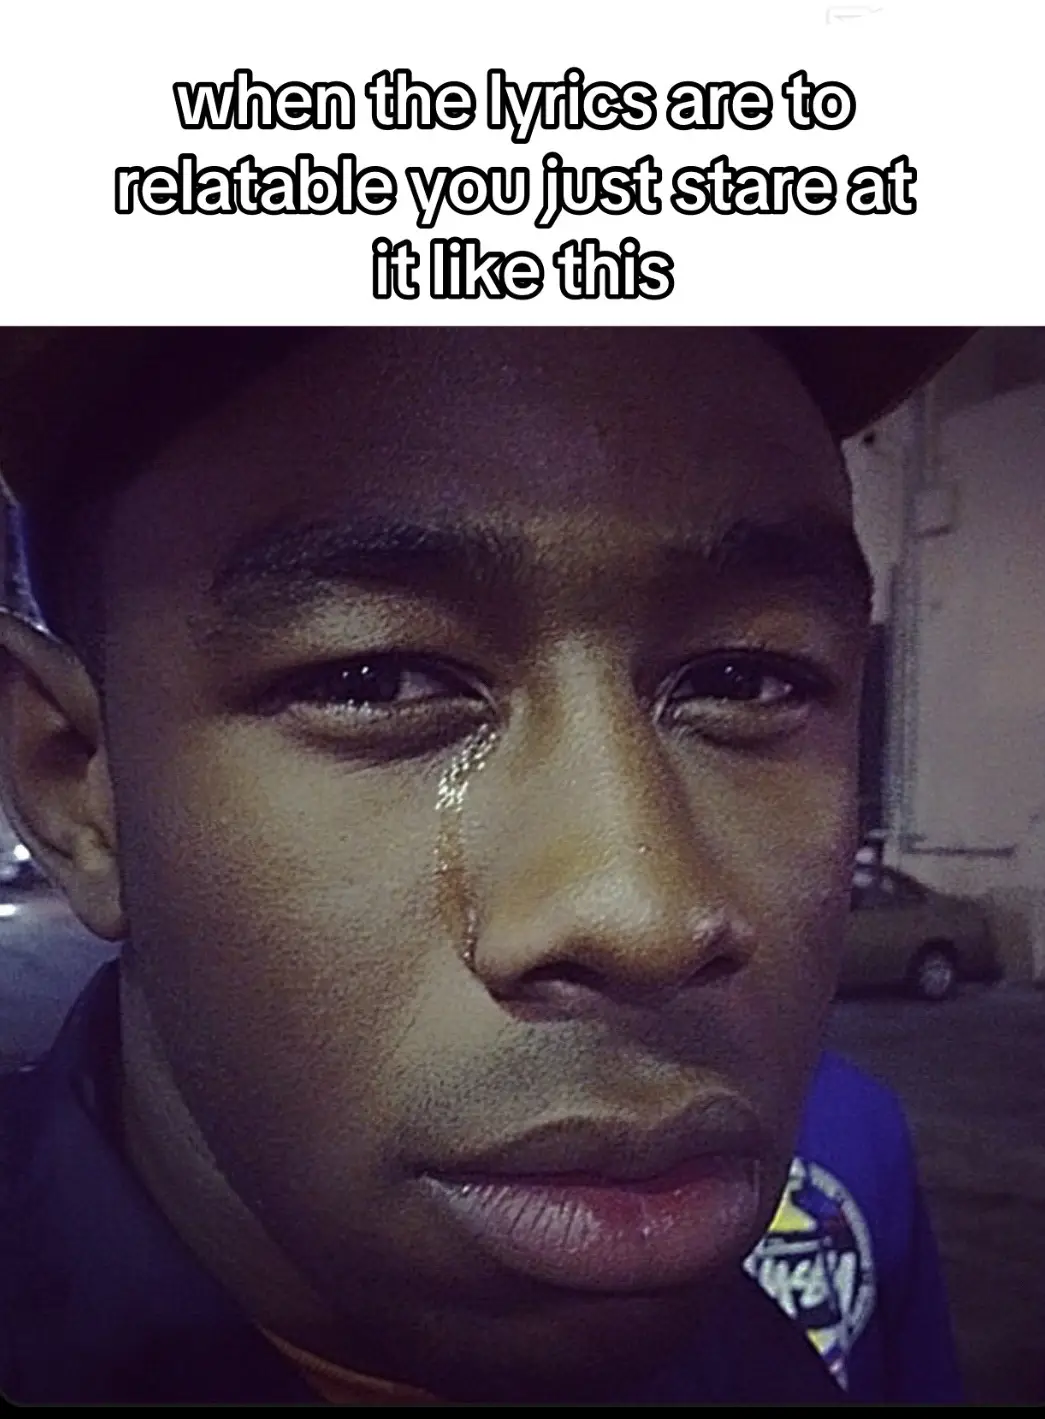 #real #sad #alpha #fypシ #fyp #xyzbca #viral #foryou #funny #tylerthecreator #brainrot #omega #relatable #foryoupage 